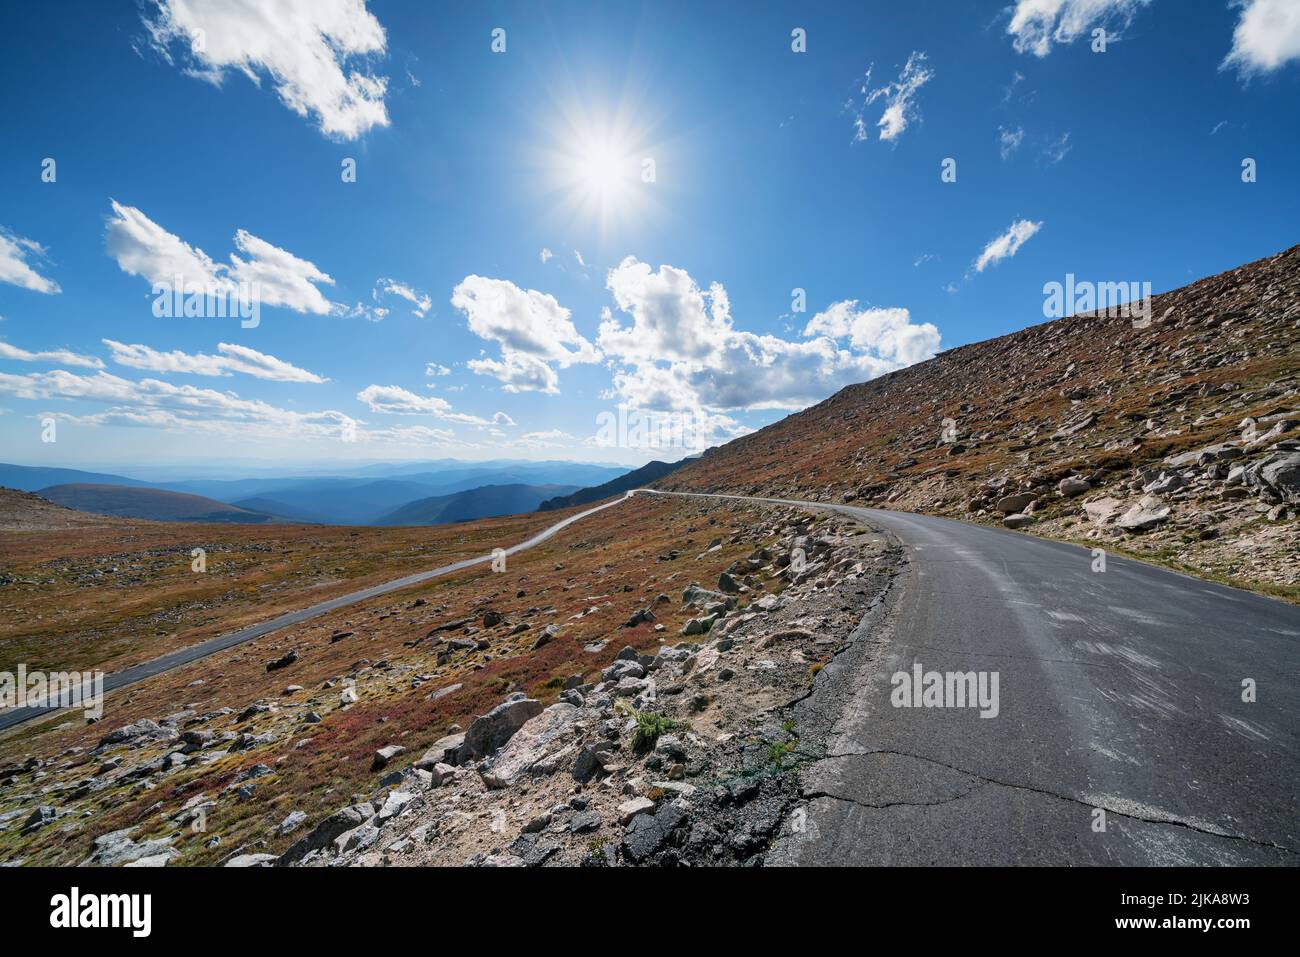 On the steep road up to the summit of Mount Evans, Rocky Mountains, Colorado, USA Stock Photo